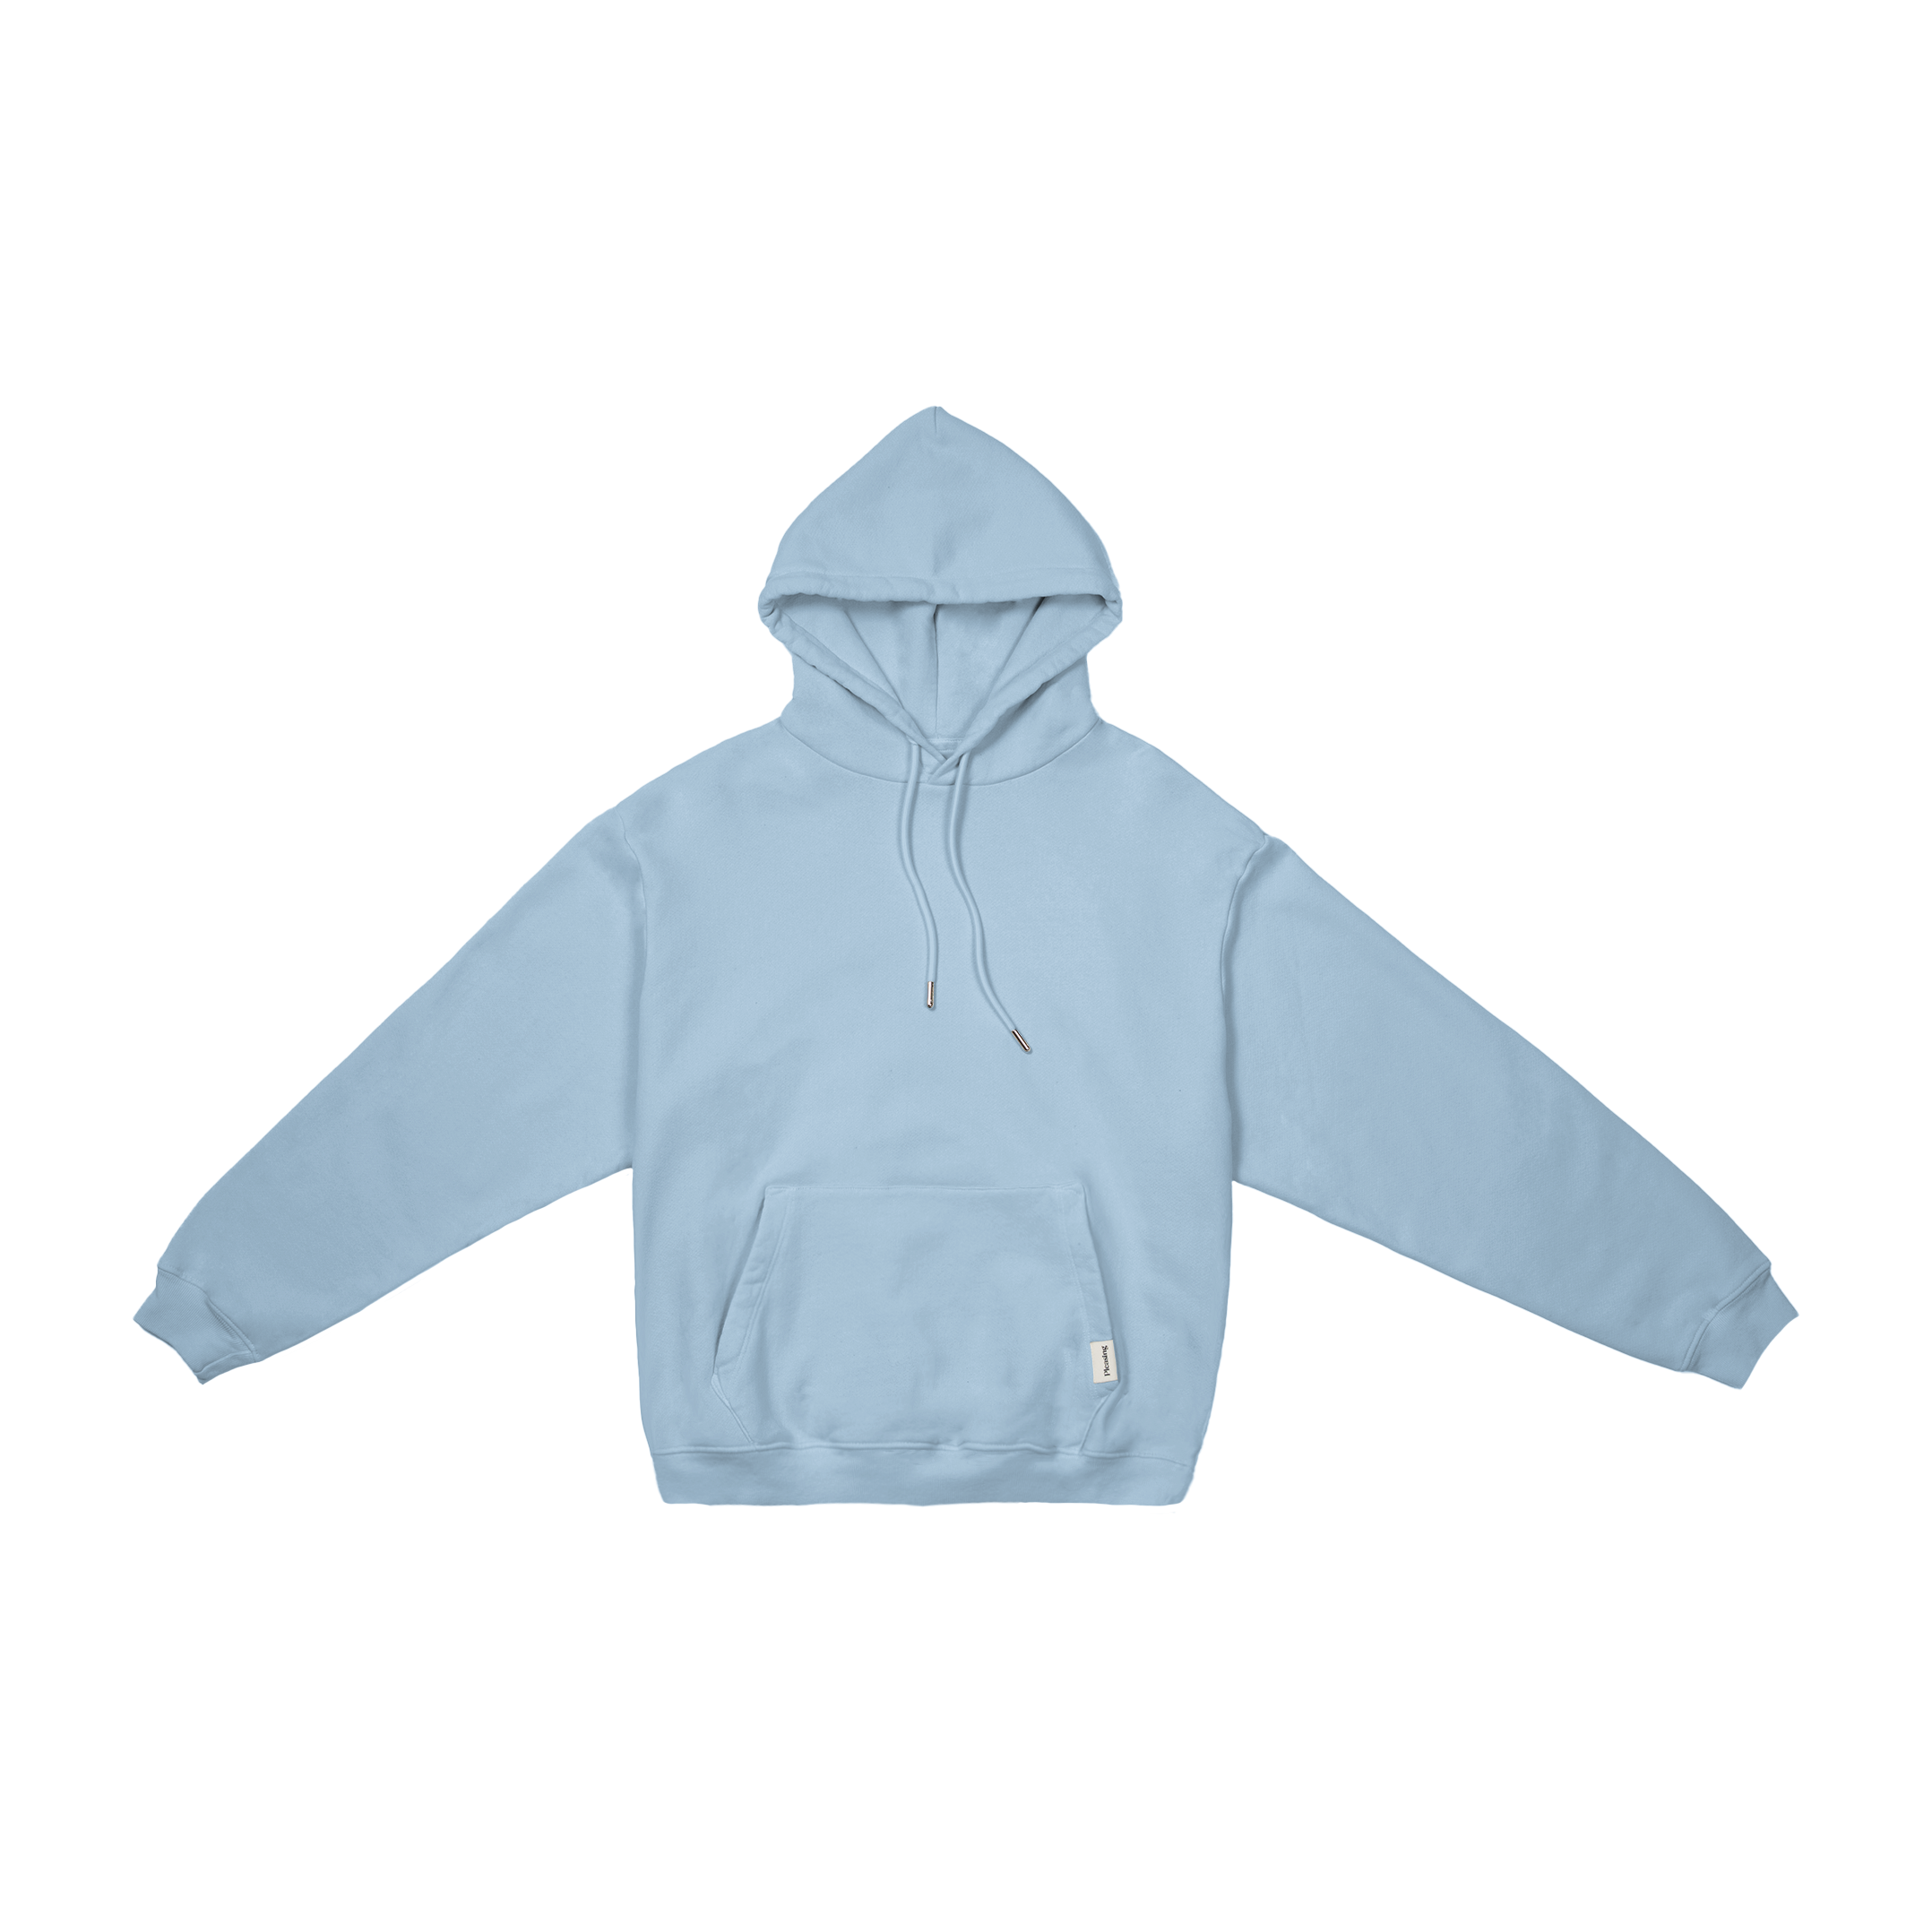 The Heavyweight Drawstring Hoodie in Blue